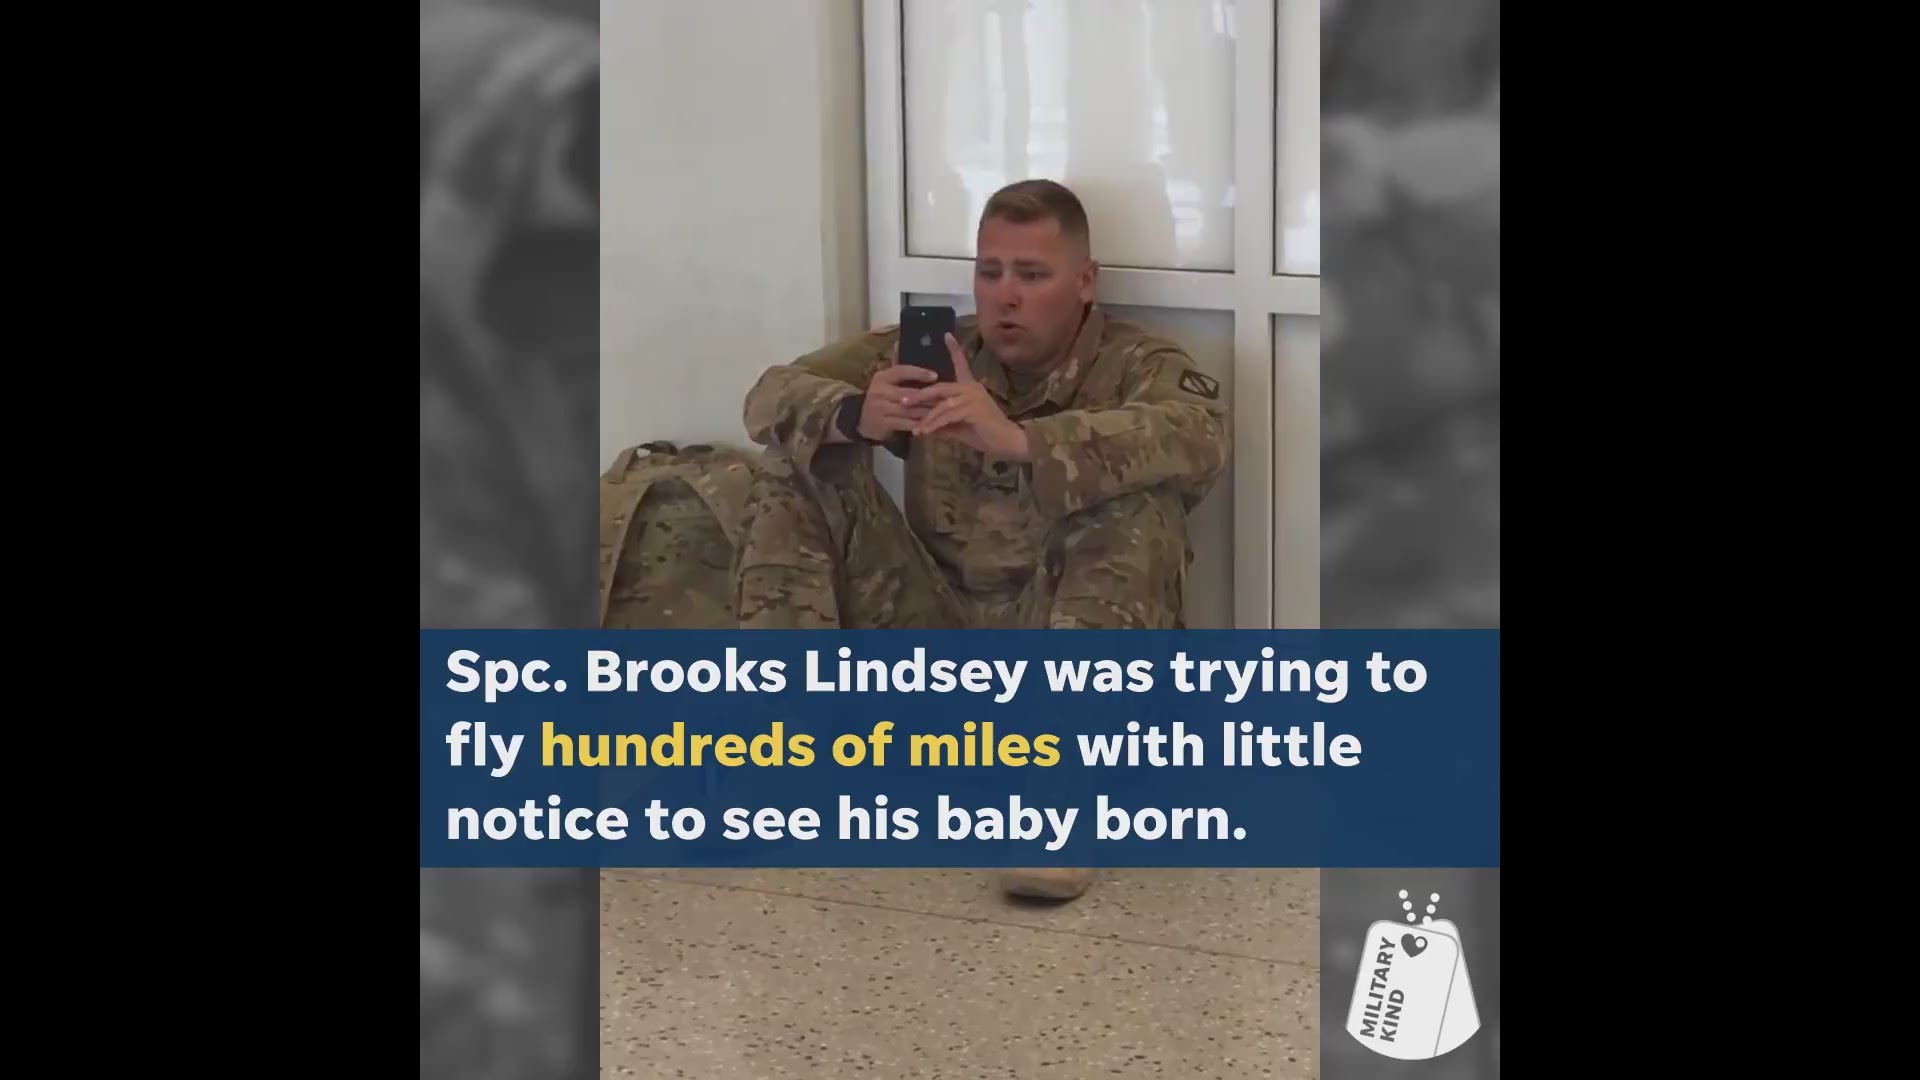 This soldier was rushing home to witness the birth of his daughter. When his flight got delayed, it ended up being a blessing in disguise. Militarykind, USA TODAY